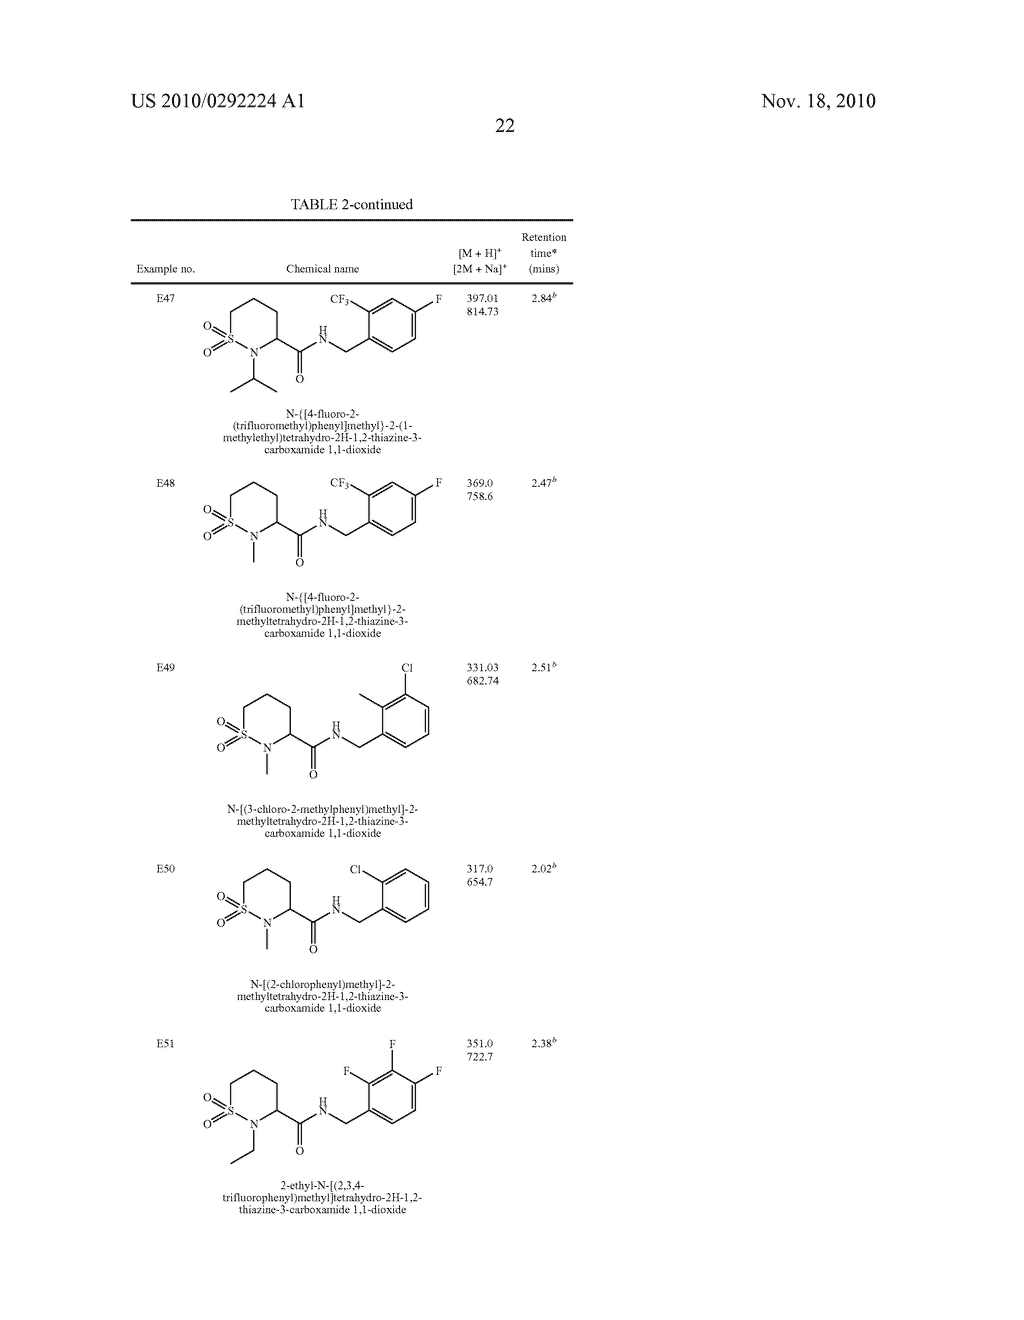 ISOTHIAZOLIDINE 1,1-DIOXIDE AND TETRAHYDRO-2H-1,2-THIAZINE 1,1-DIOXIDE DERIVATIVES AS P2X7 MODULATORS - diagram, schematic, and image 23